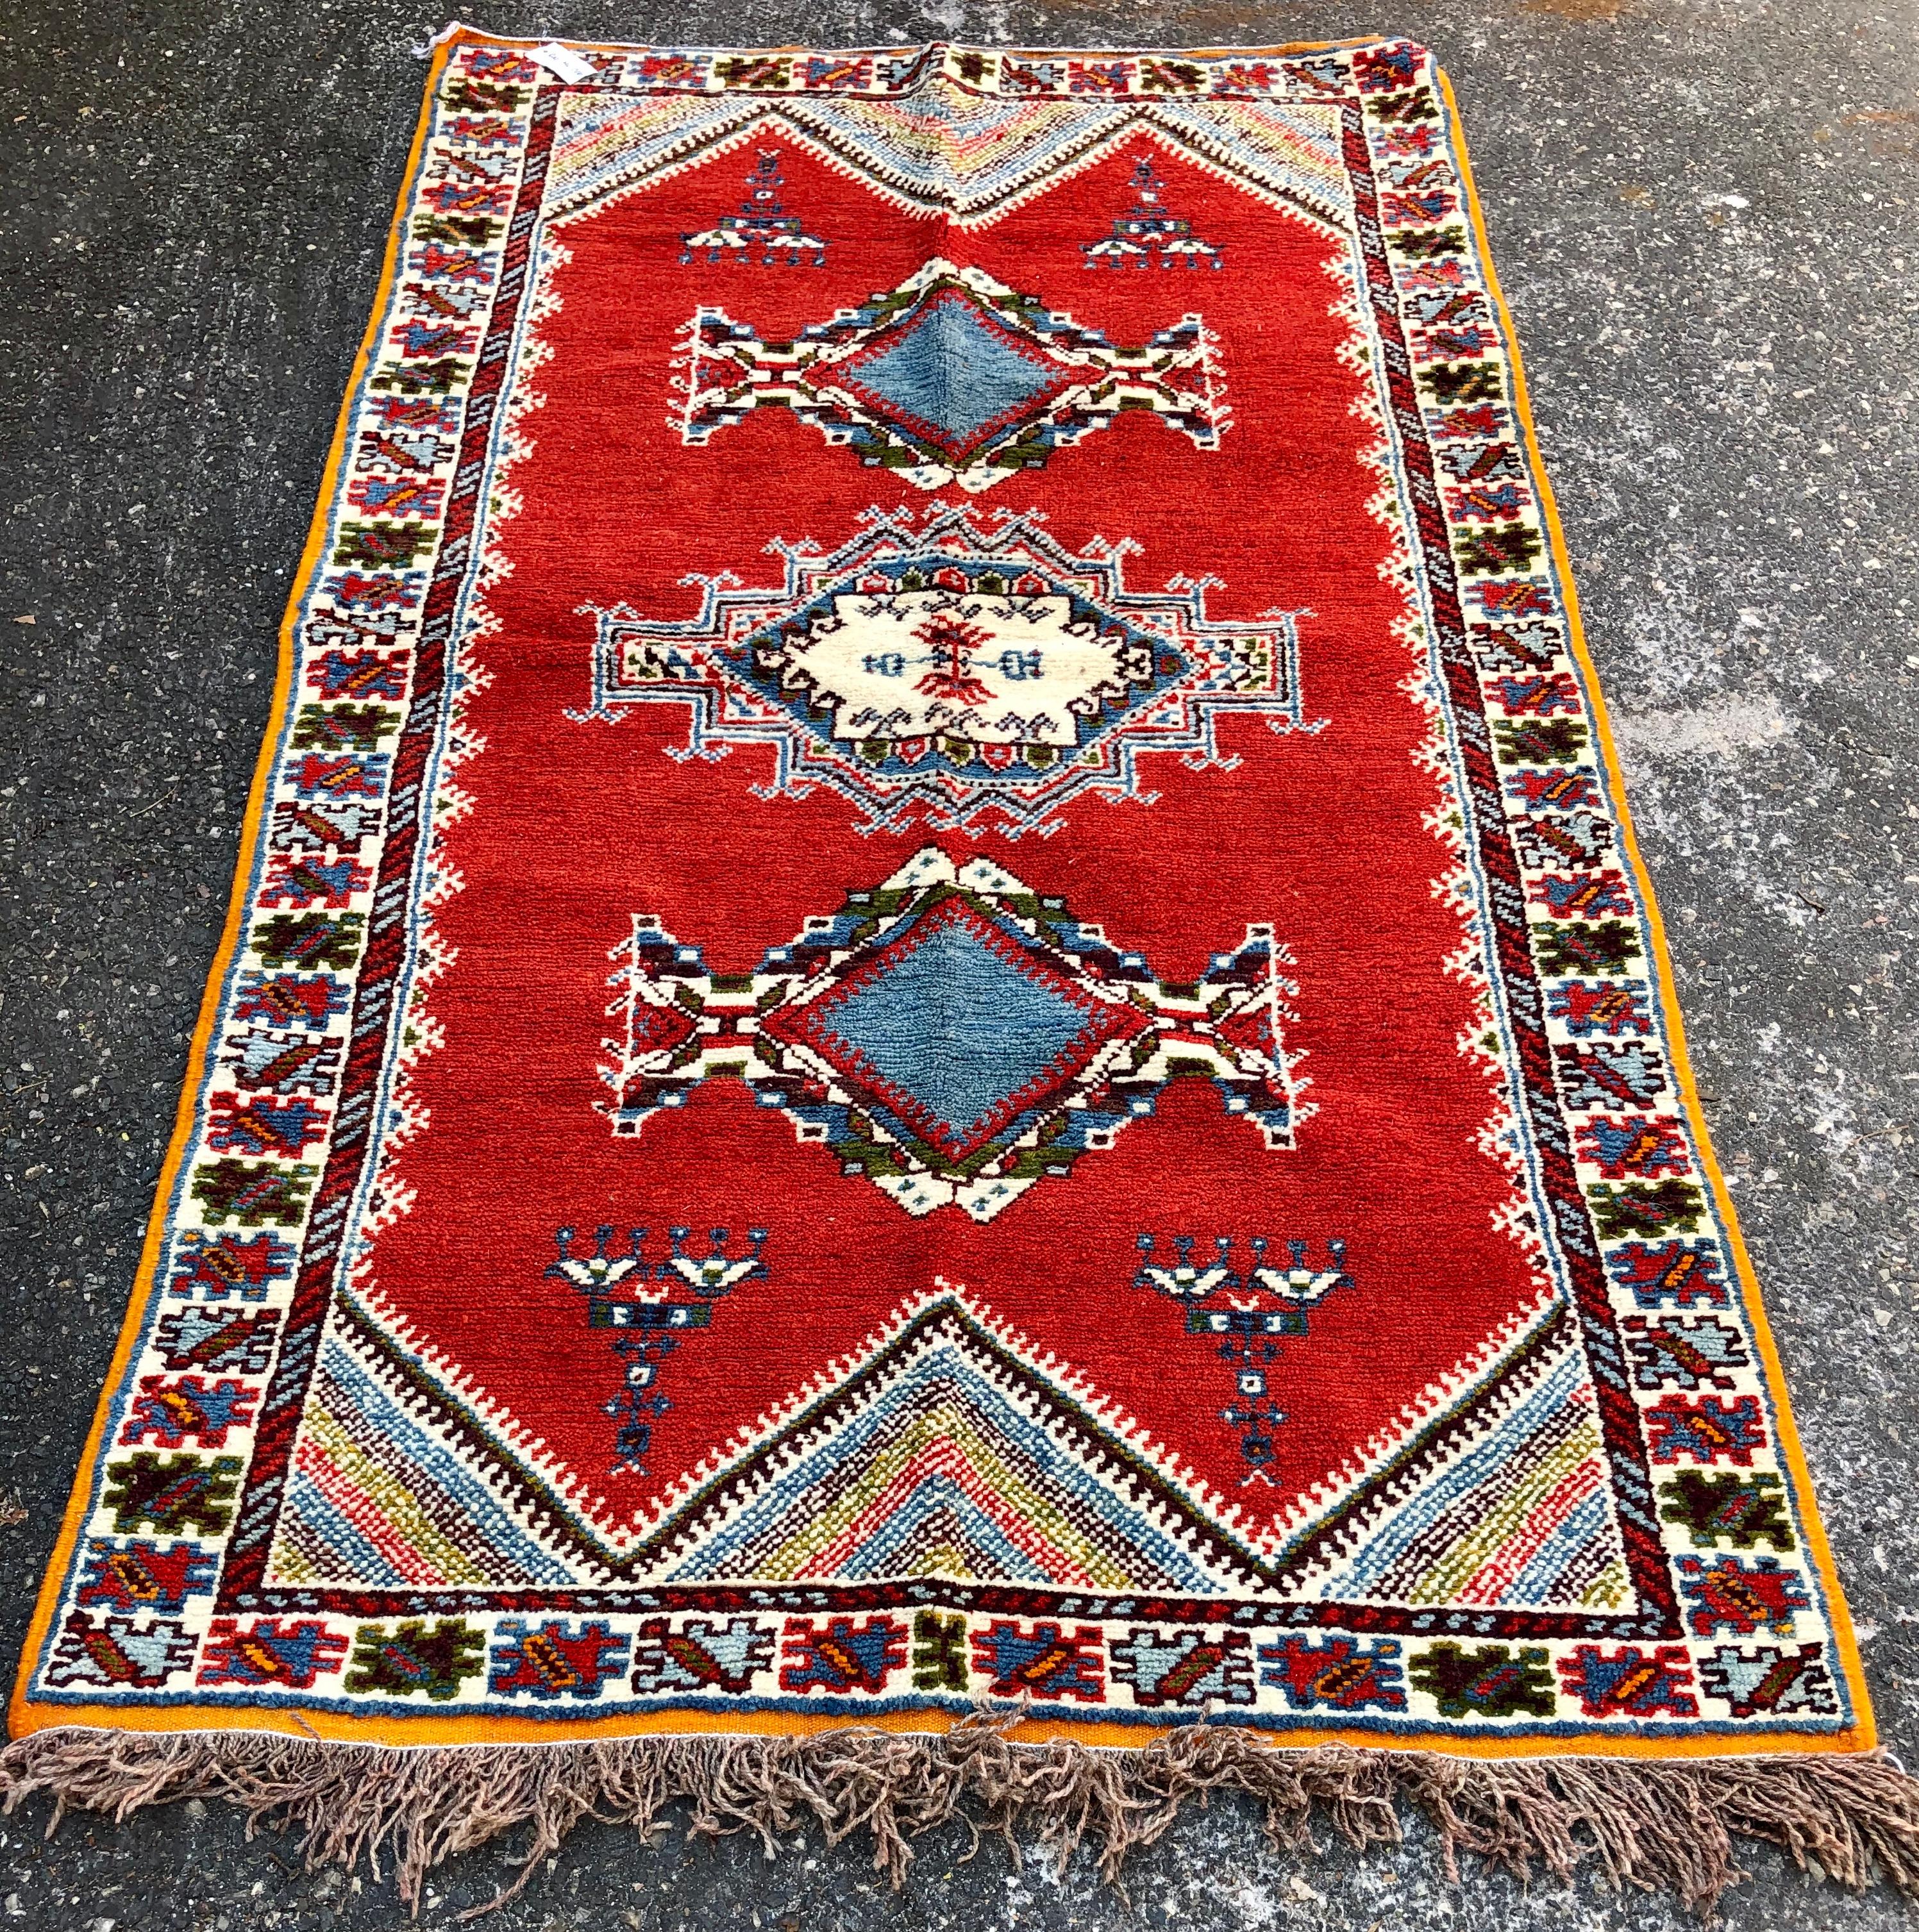 A one of a kind Moroccan tribal handwoven wool rug. The rug is finely crafted of locally sourced high quality wool and organic vegetables dyes. The handwoven rug features intricate geometrical motifs in the shape of large diamonds in blue and a